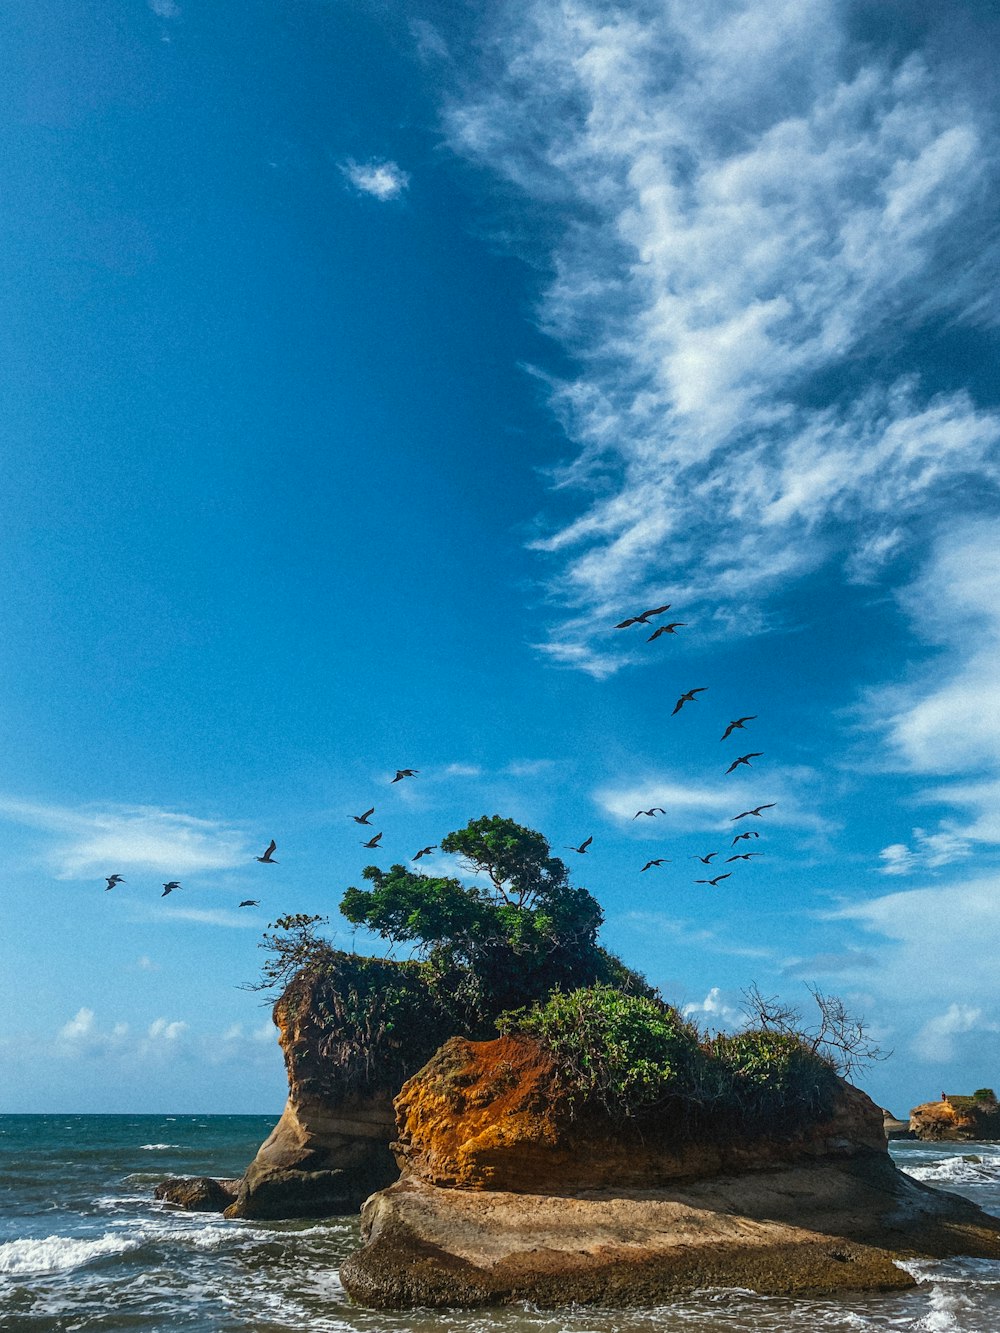 birds flying over a small island